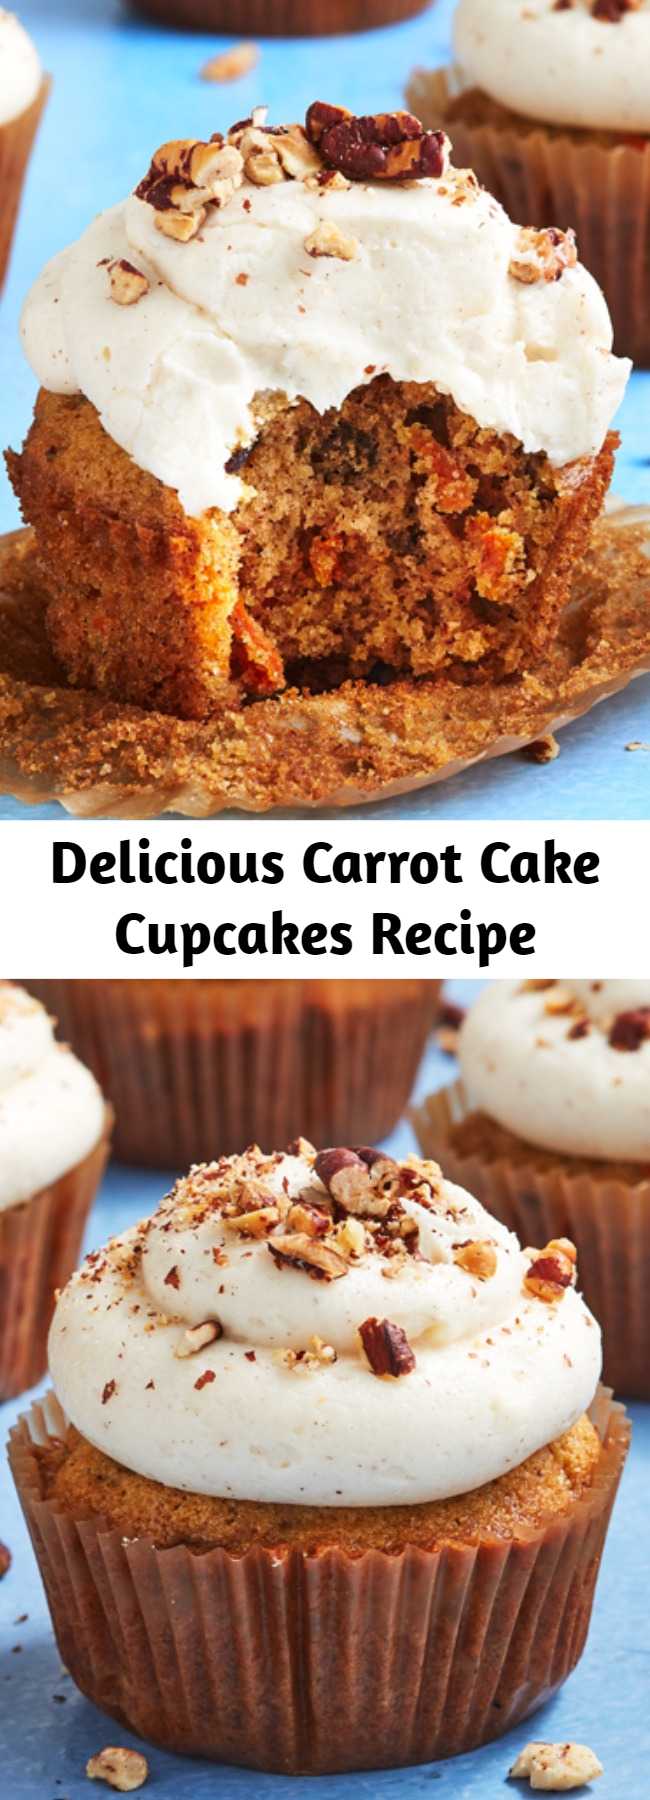 Delicious Carrot Cake Cupcakes Recipe - The perfect spring treat.